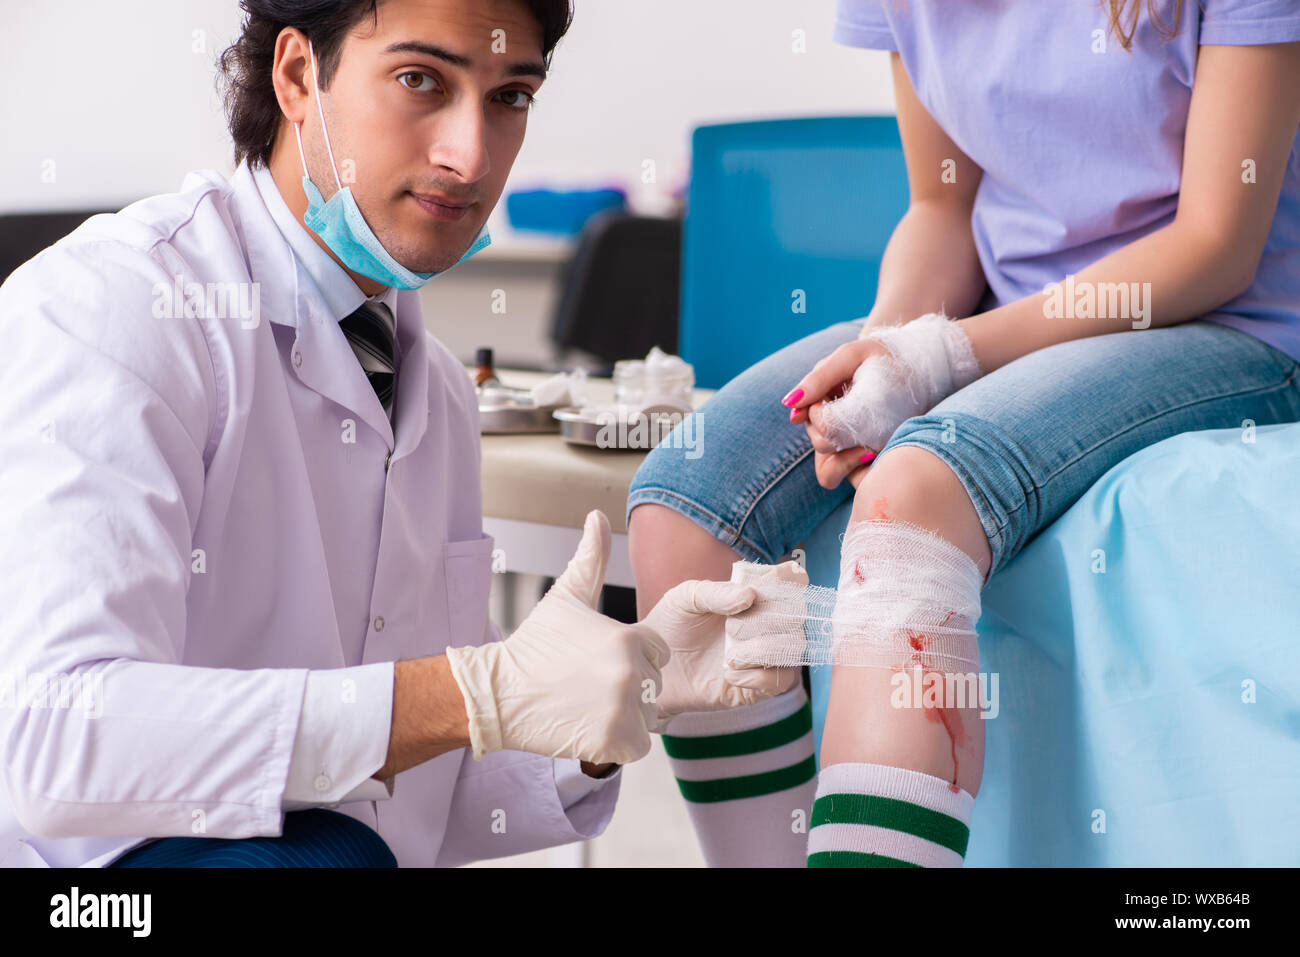 Leg injured young woman visiting male doctor Stock Photo